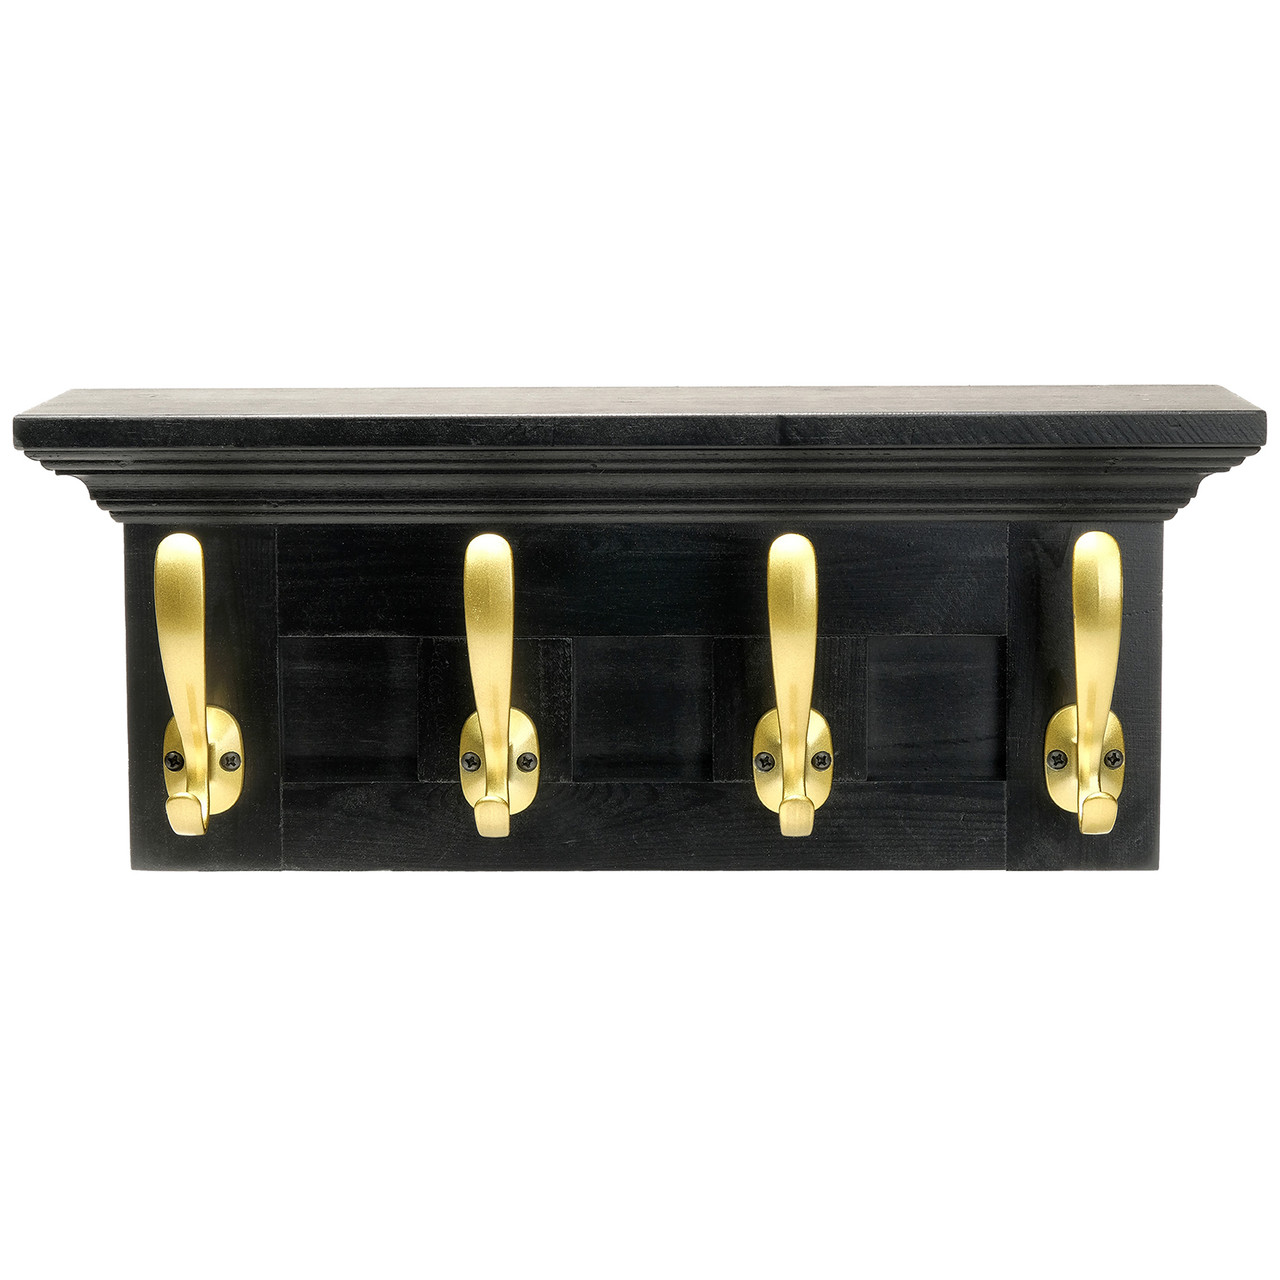 Black Coat Rack with Gold Hooks - Excello Global Brands